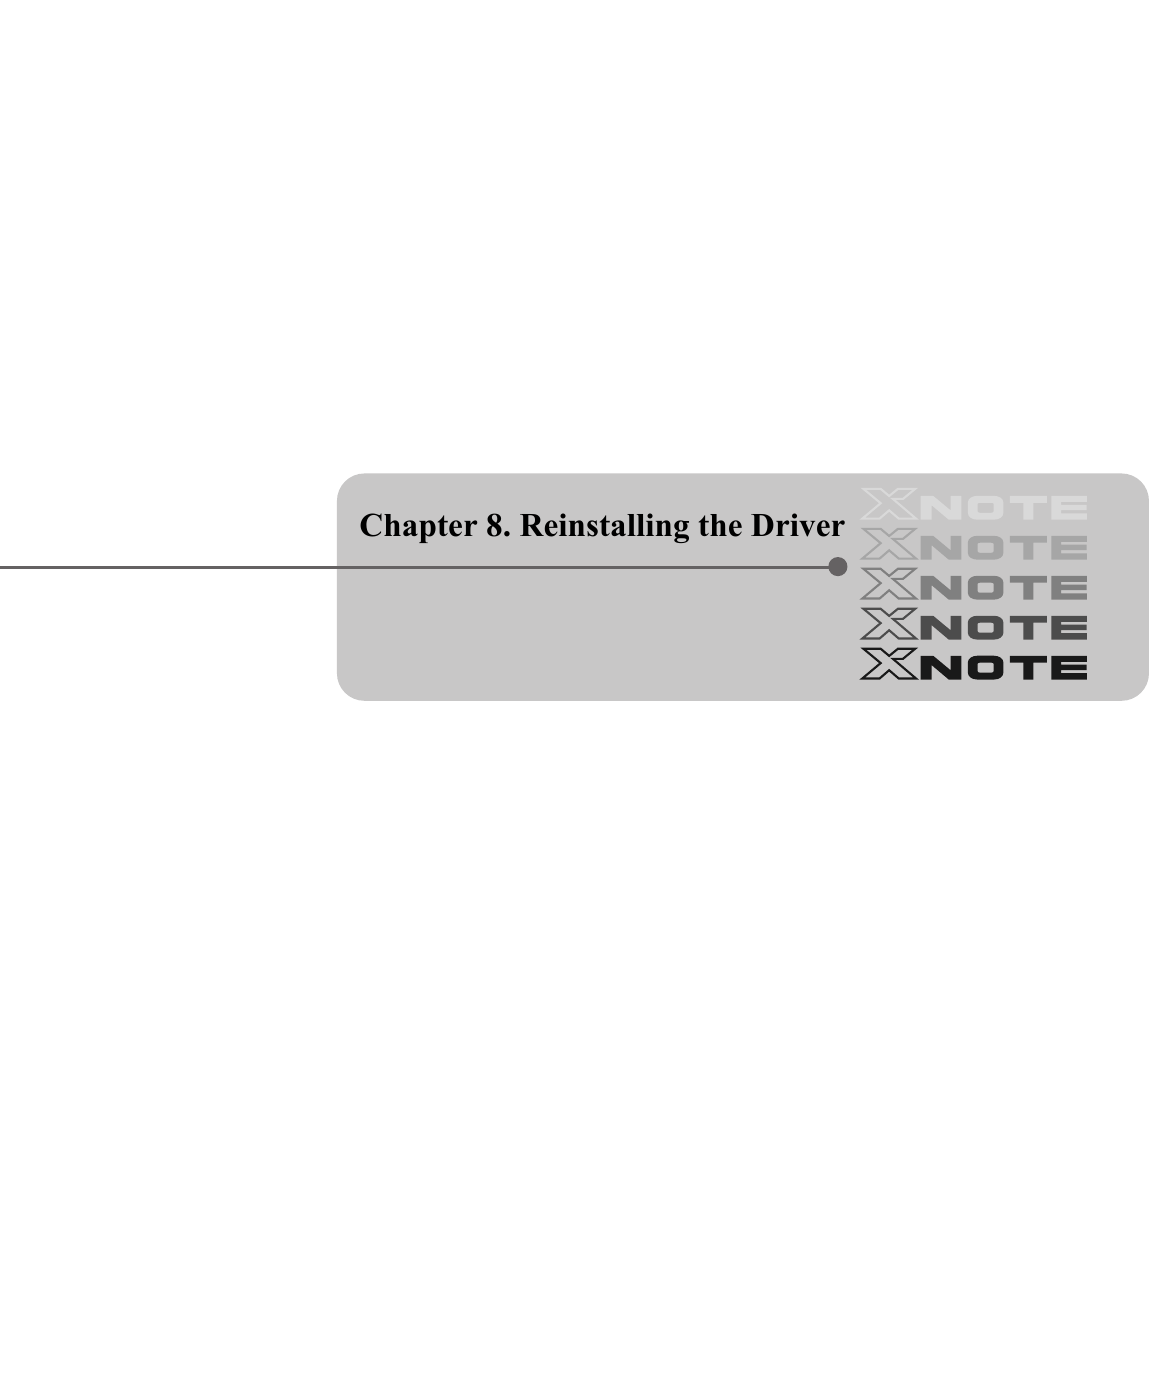 Chapter 8. Reinstalling the Driver